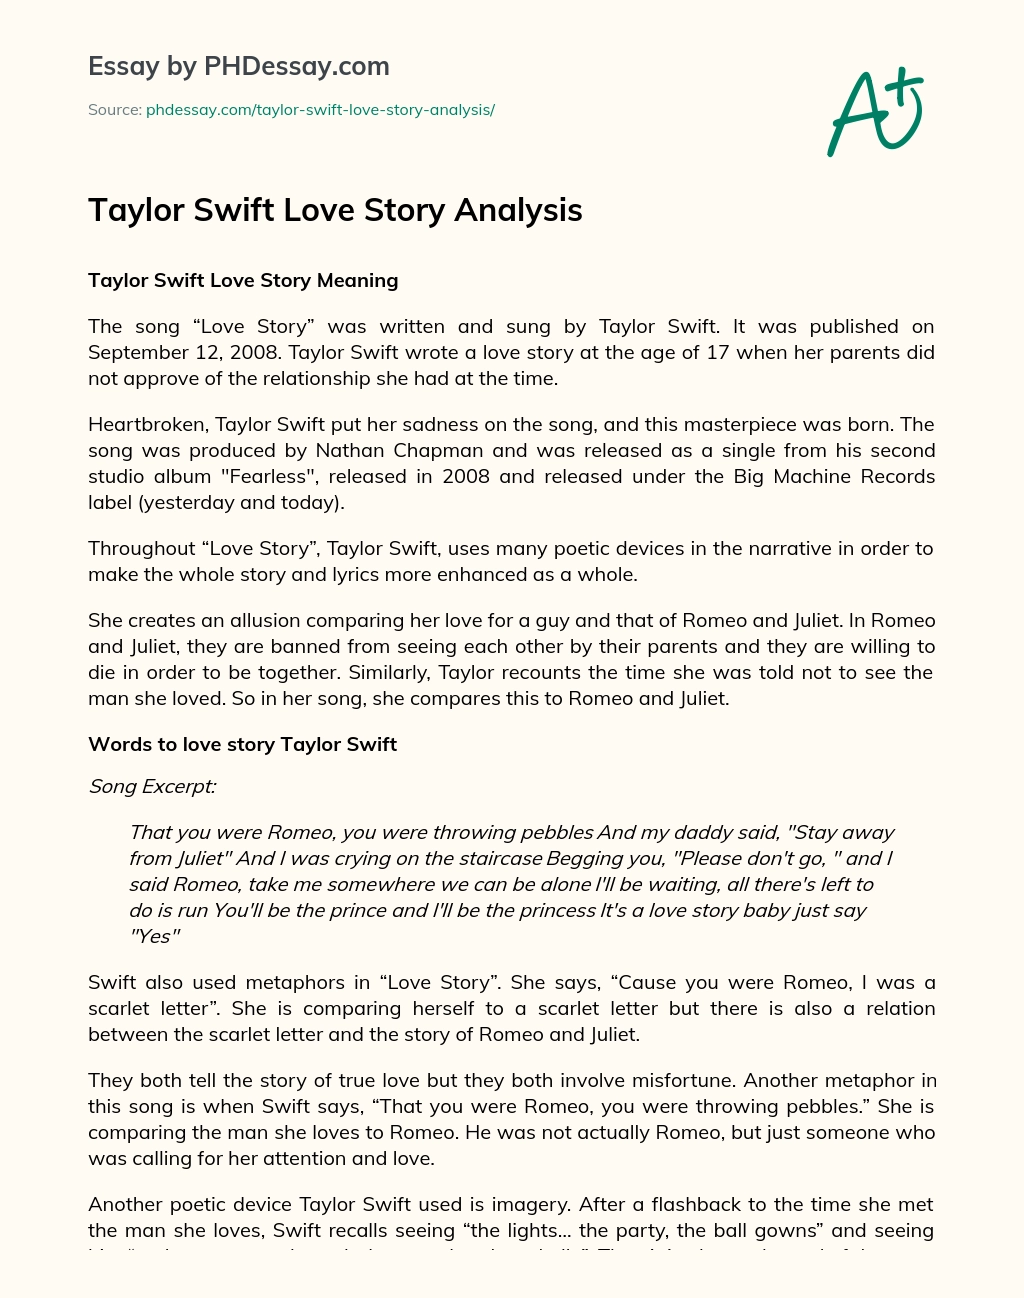 essay about love story by taylor swift